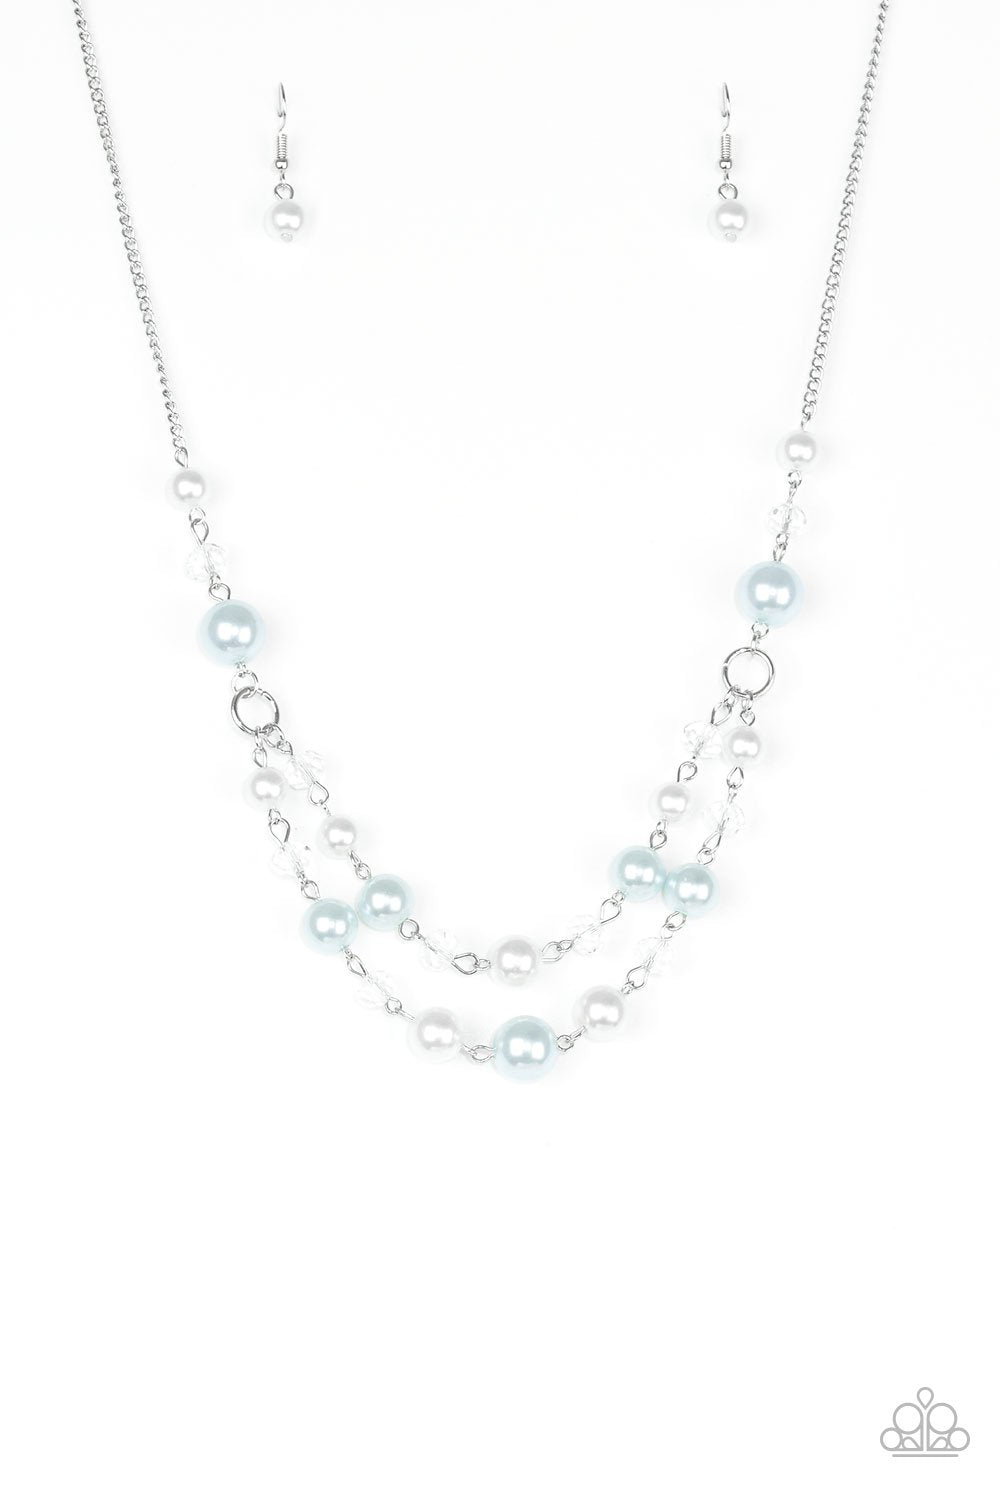 The Princess BRIDESMAID Blue and White Pearl Necklace - Paparazzi Accessories-CarasShop.com - $5 Jewelry by Cara Jewels